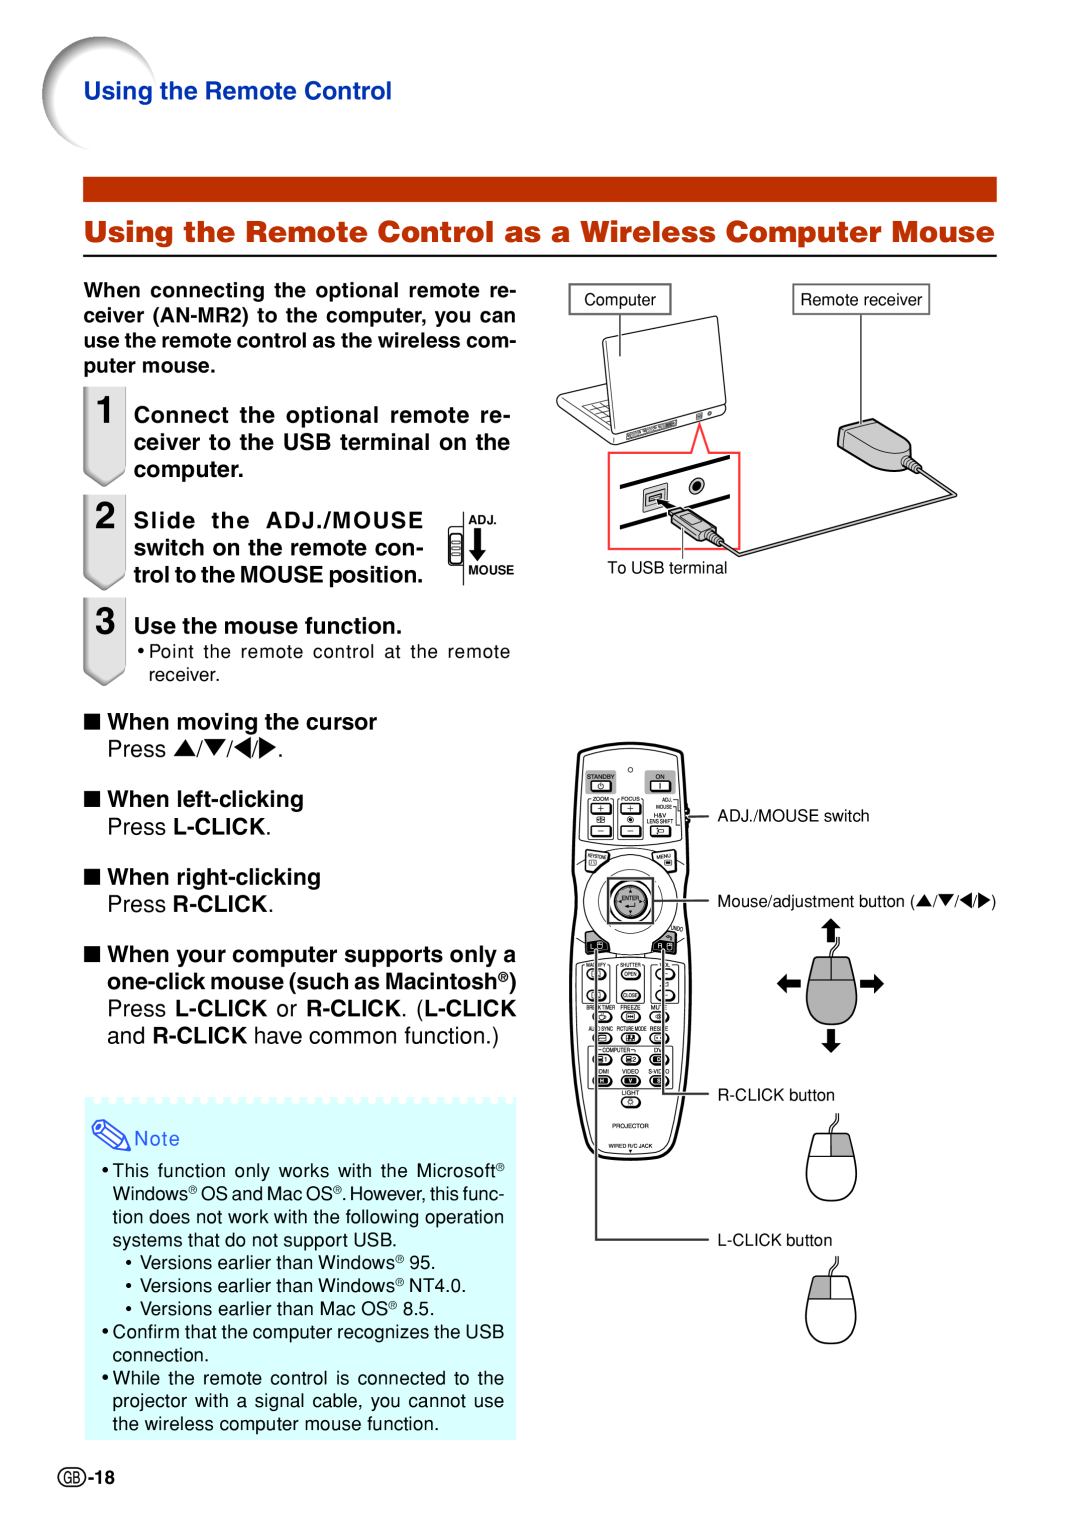 Sharp XG-P610X Using the Remote Control as a Wireless Computer Mouse, Slide the ADJ./MOUSE, switch on the remote con 